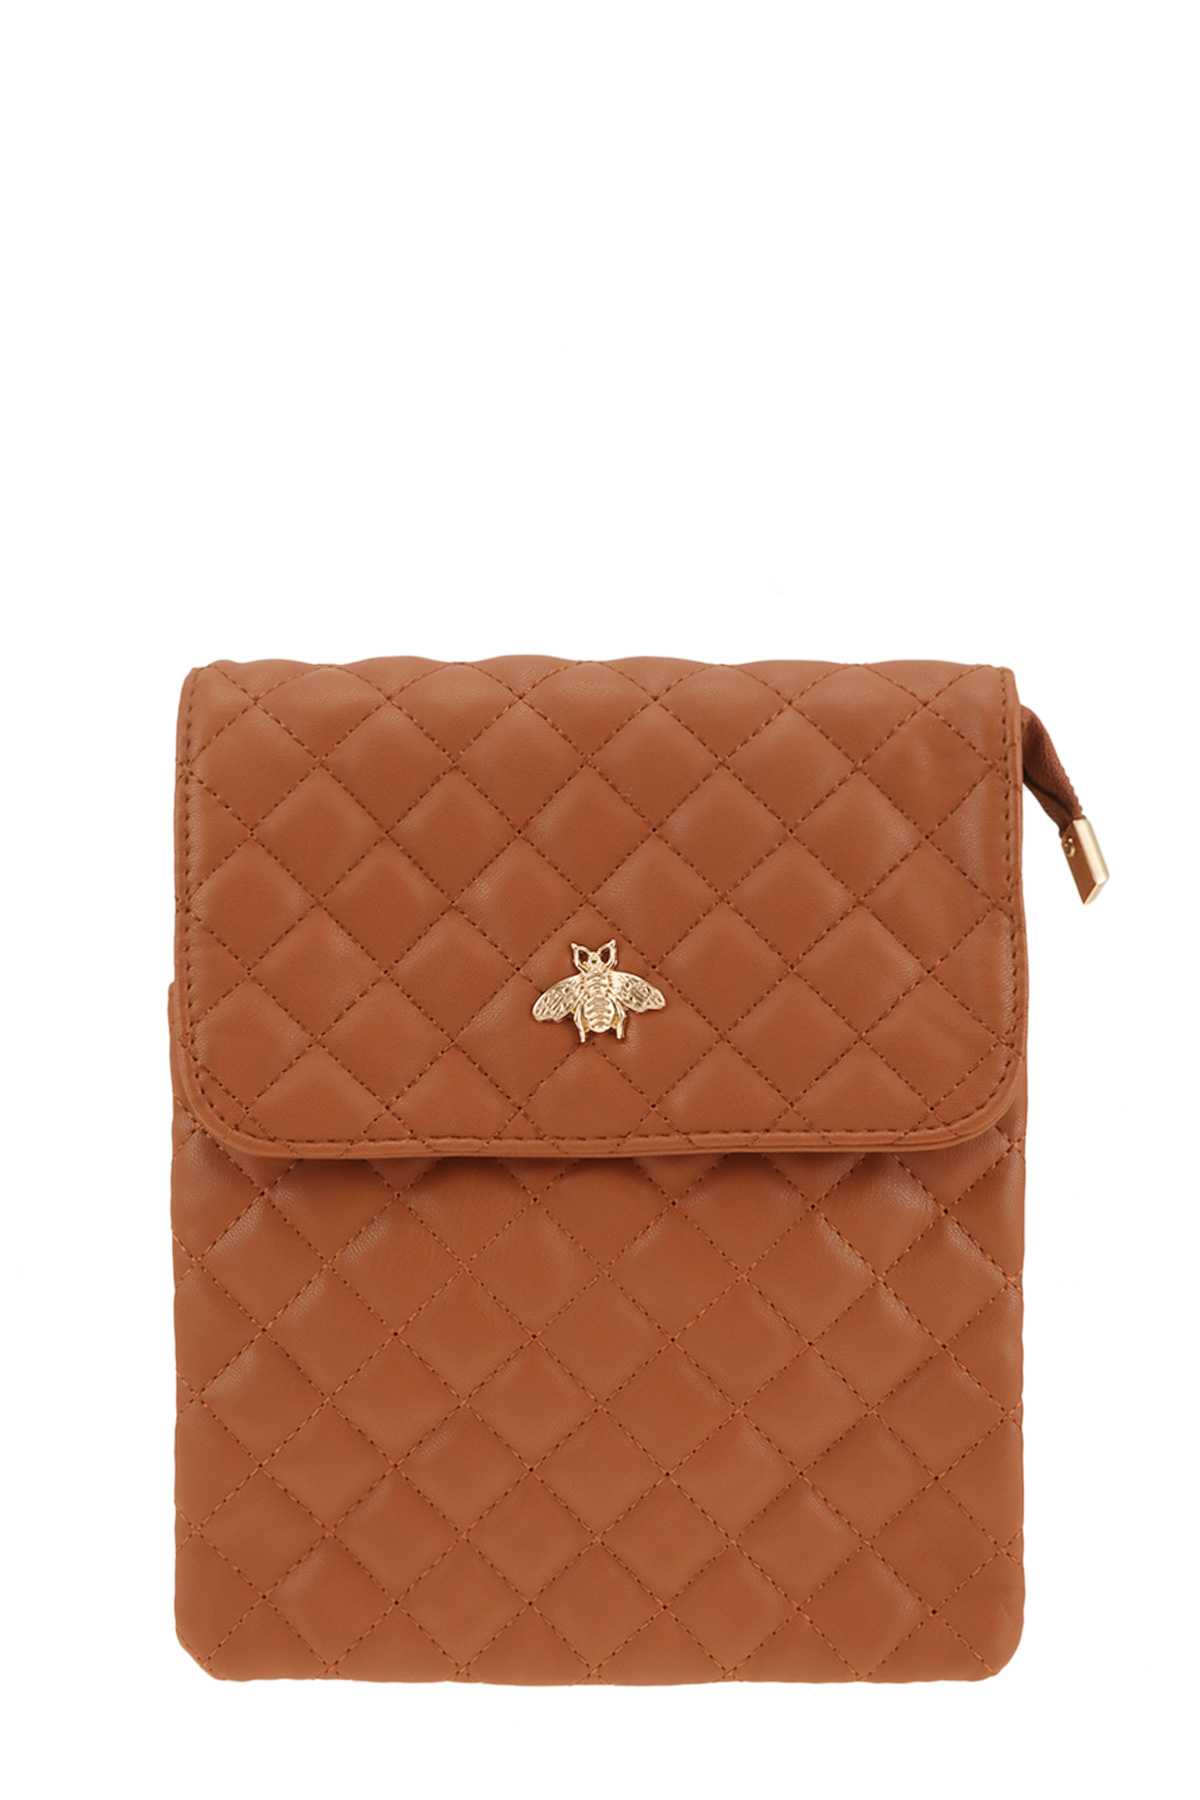 Diamond Quilted Rectangle Shape with Bee Accent Bag